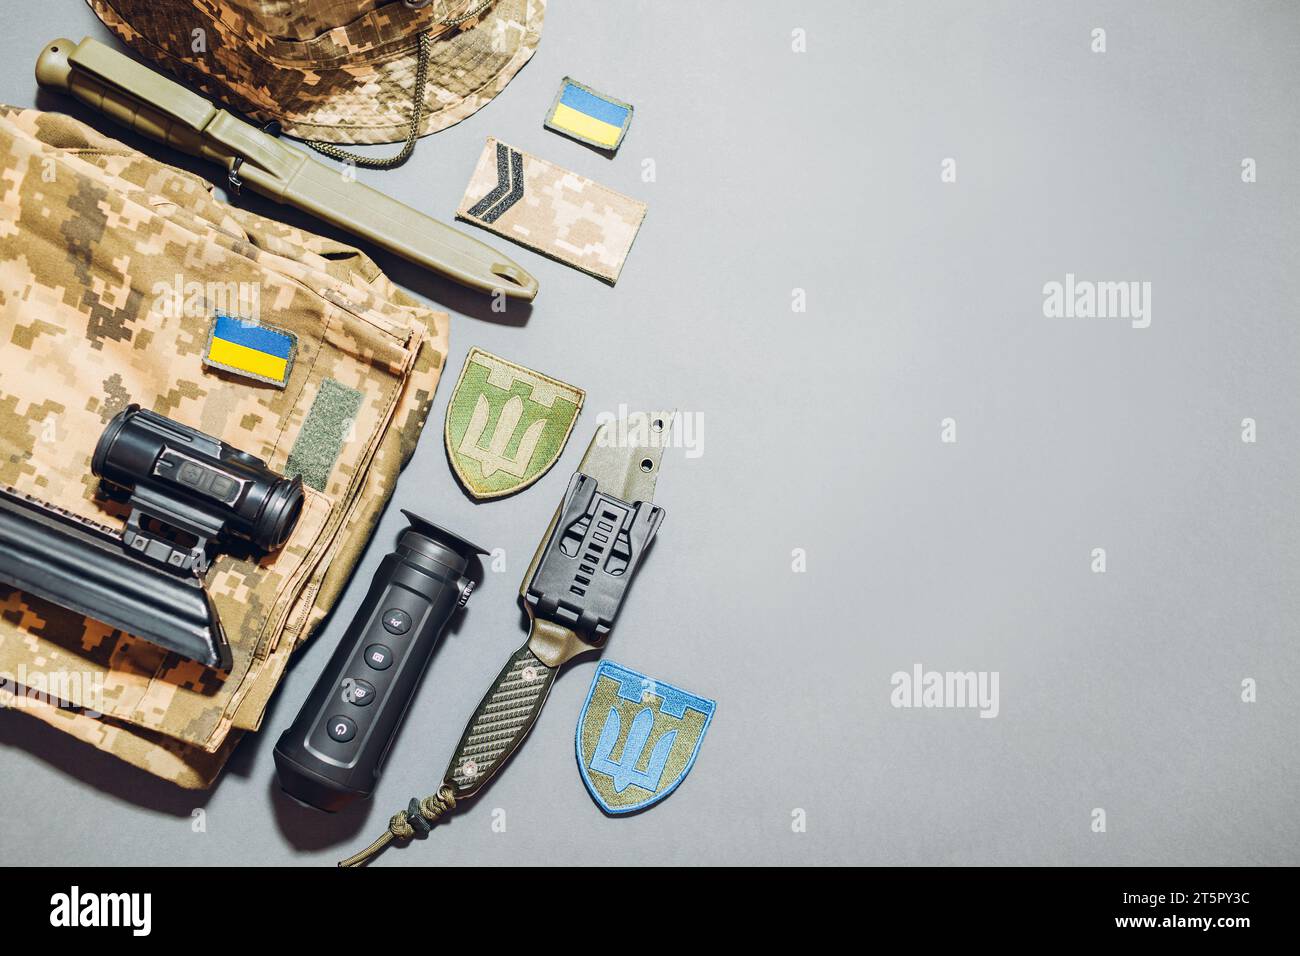 Ukrainian military gear flat lay background. Army tactical uniform clothes, accessories, thermal imager, ammunition, knives with national flags and em Stock Photo